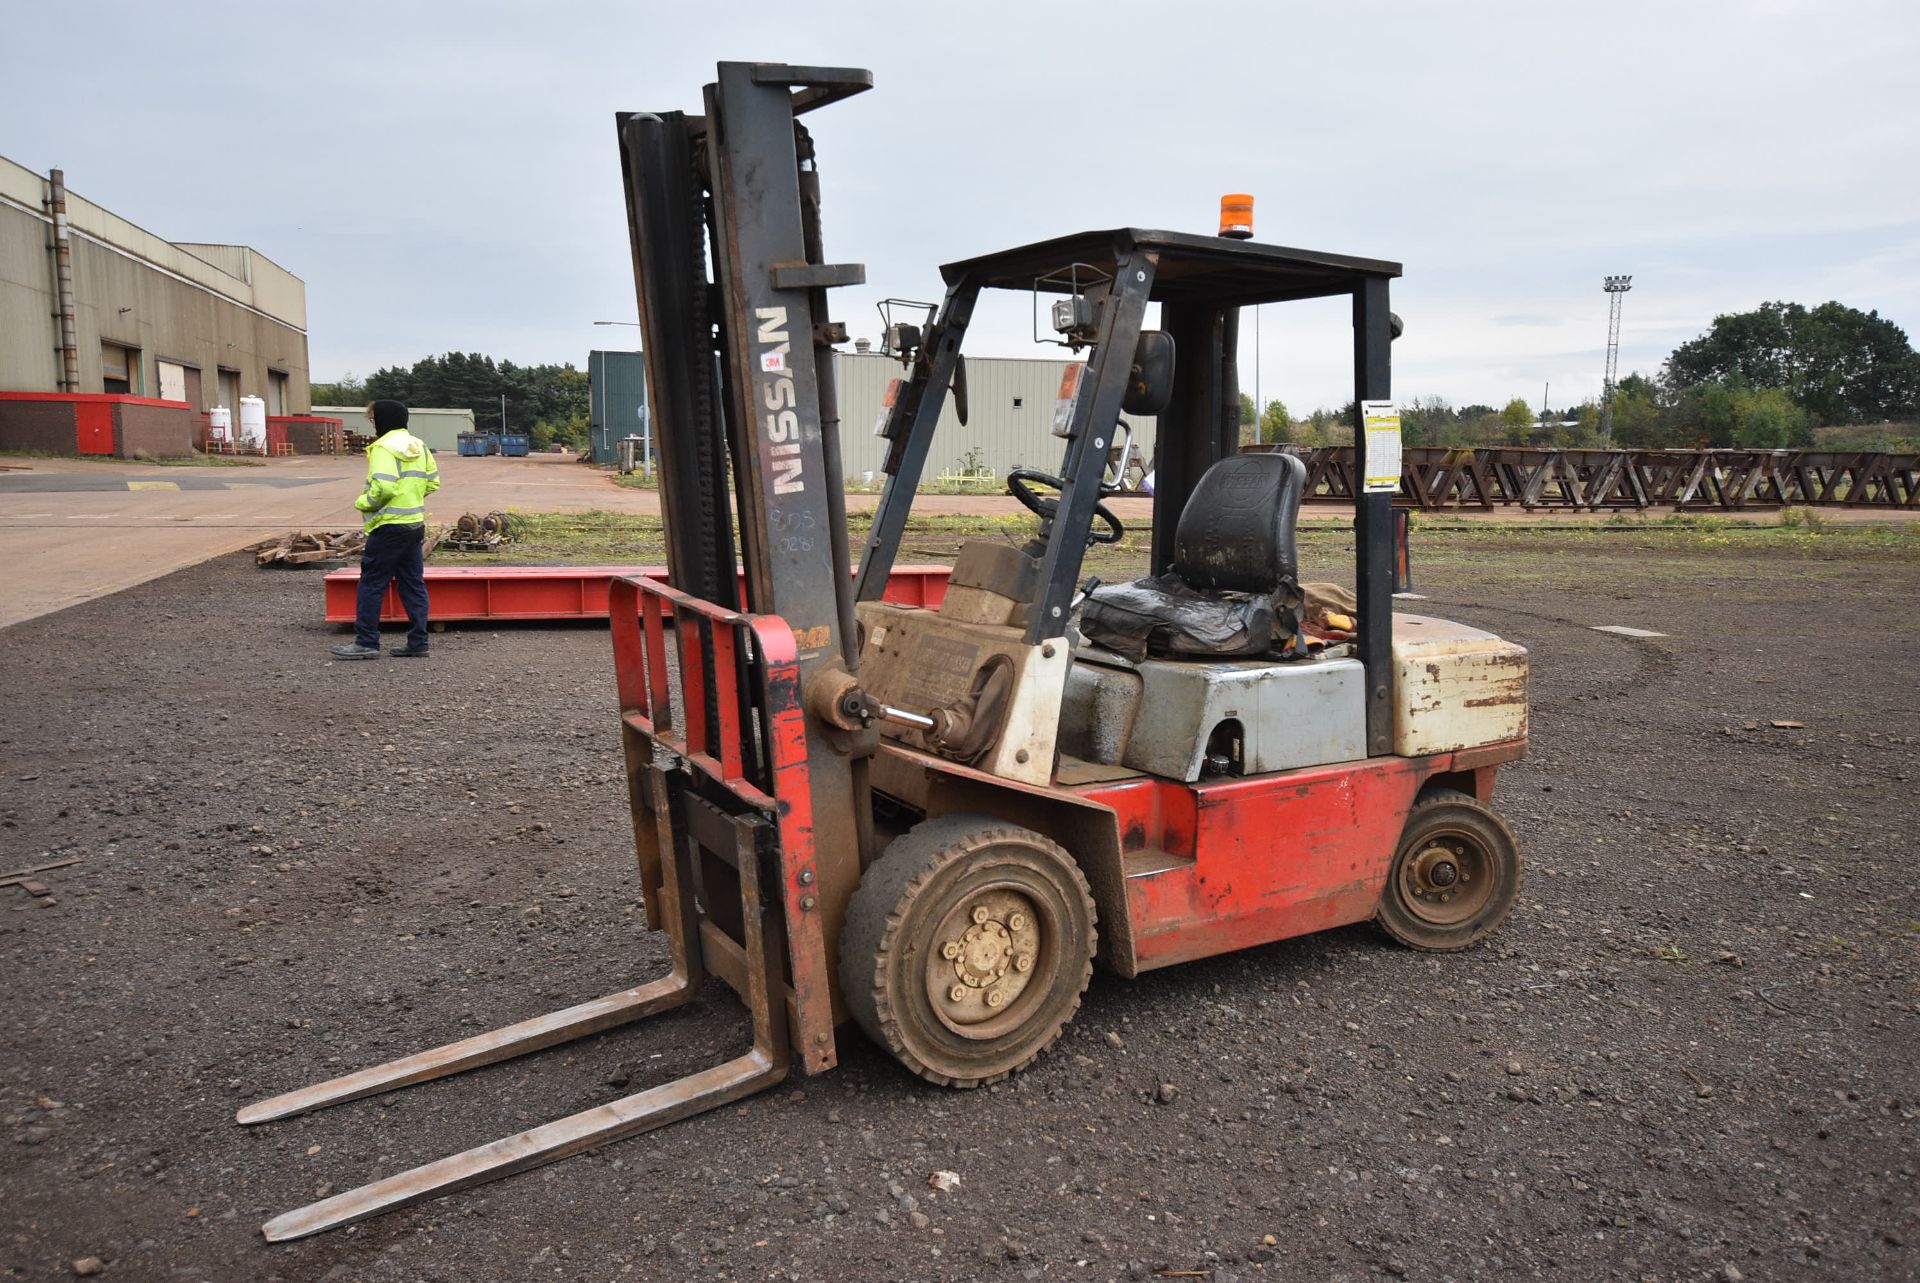 Nissan 30 3000kg cap. Diesel Fork Lift Truck, serial no. 102E, 18808 hours (at time of listing), - Image 4 of 7